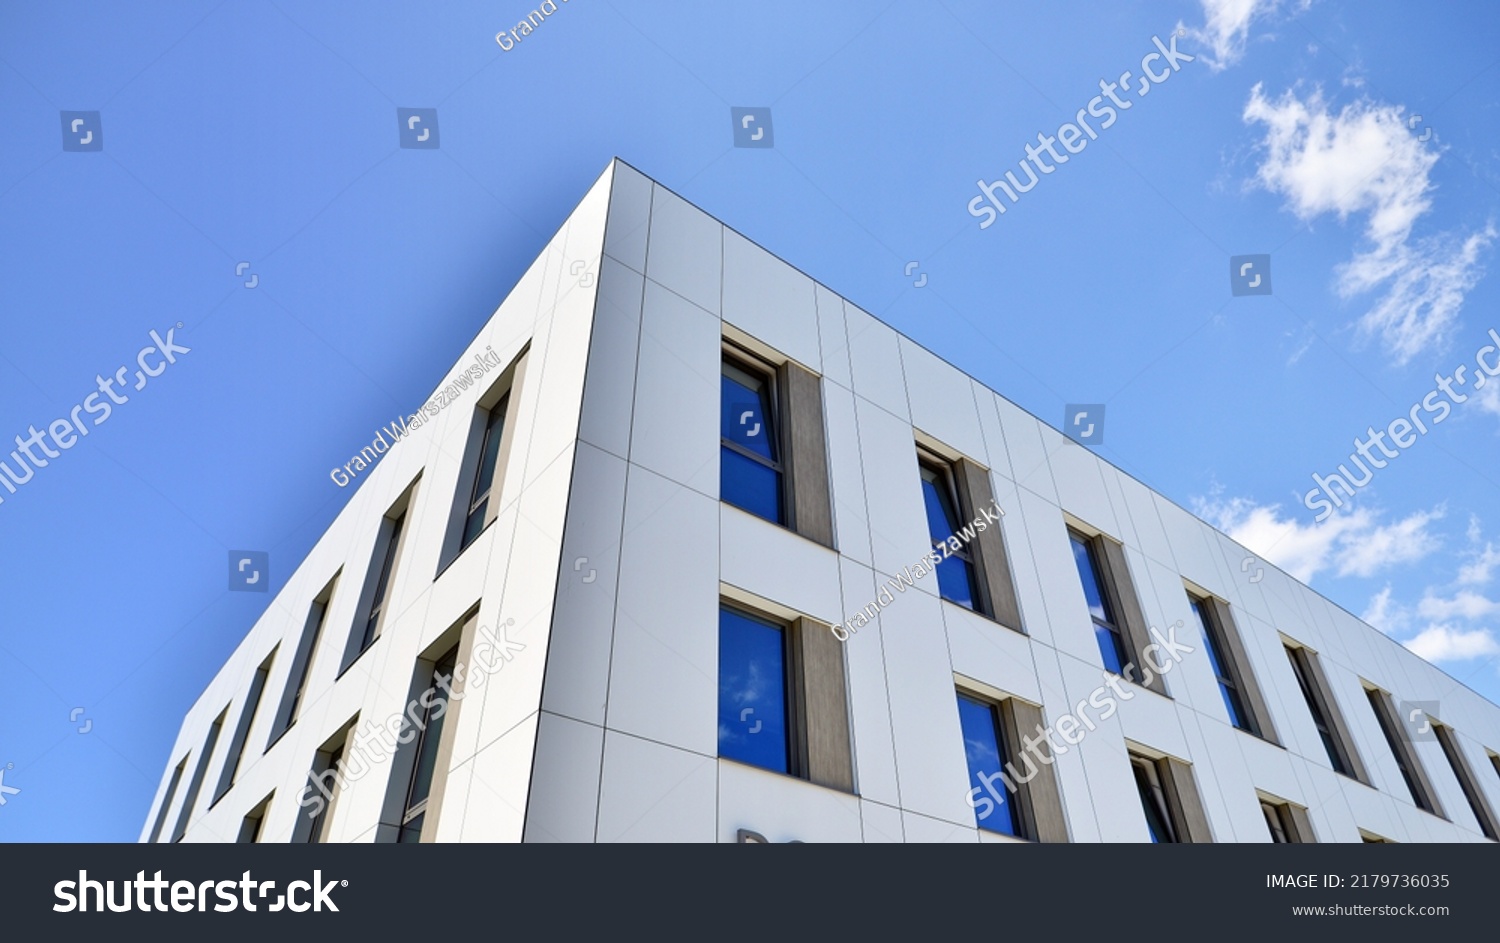 Office building with white aluminum composite panels. Facade wall made of glass and metal. Abstract modern business architecture. #2179736035